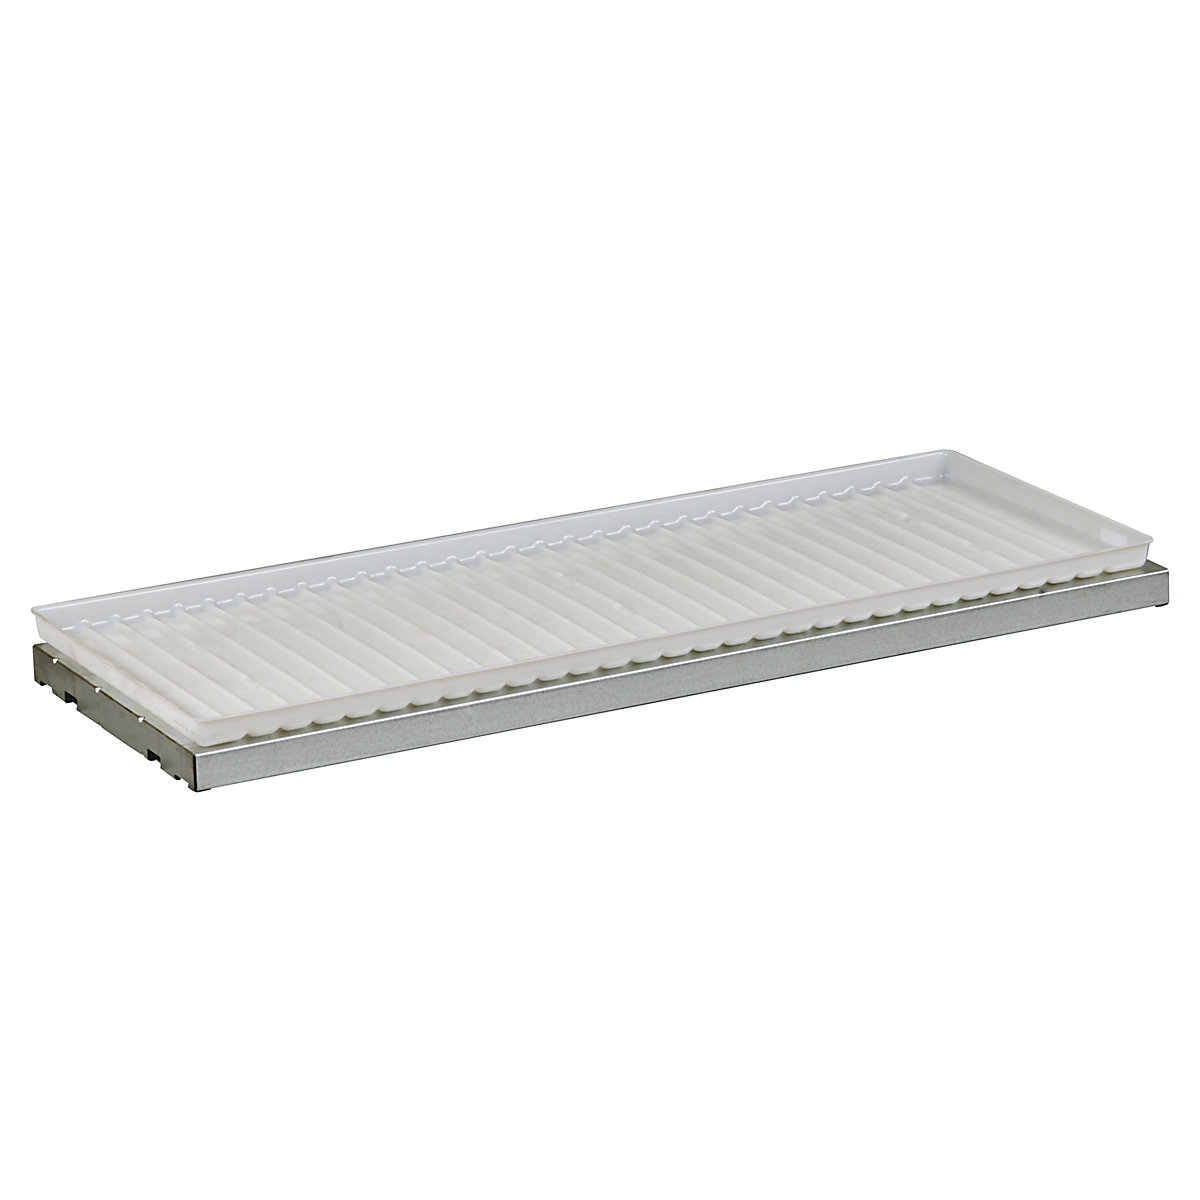 Shelf – Justrite, for corrosive media, such as acids, with PE tray, WxD 1092 x 457 mm